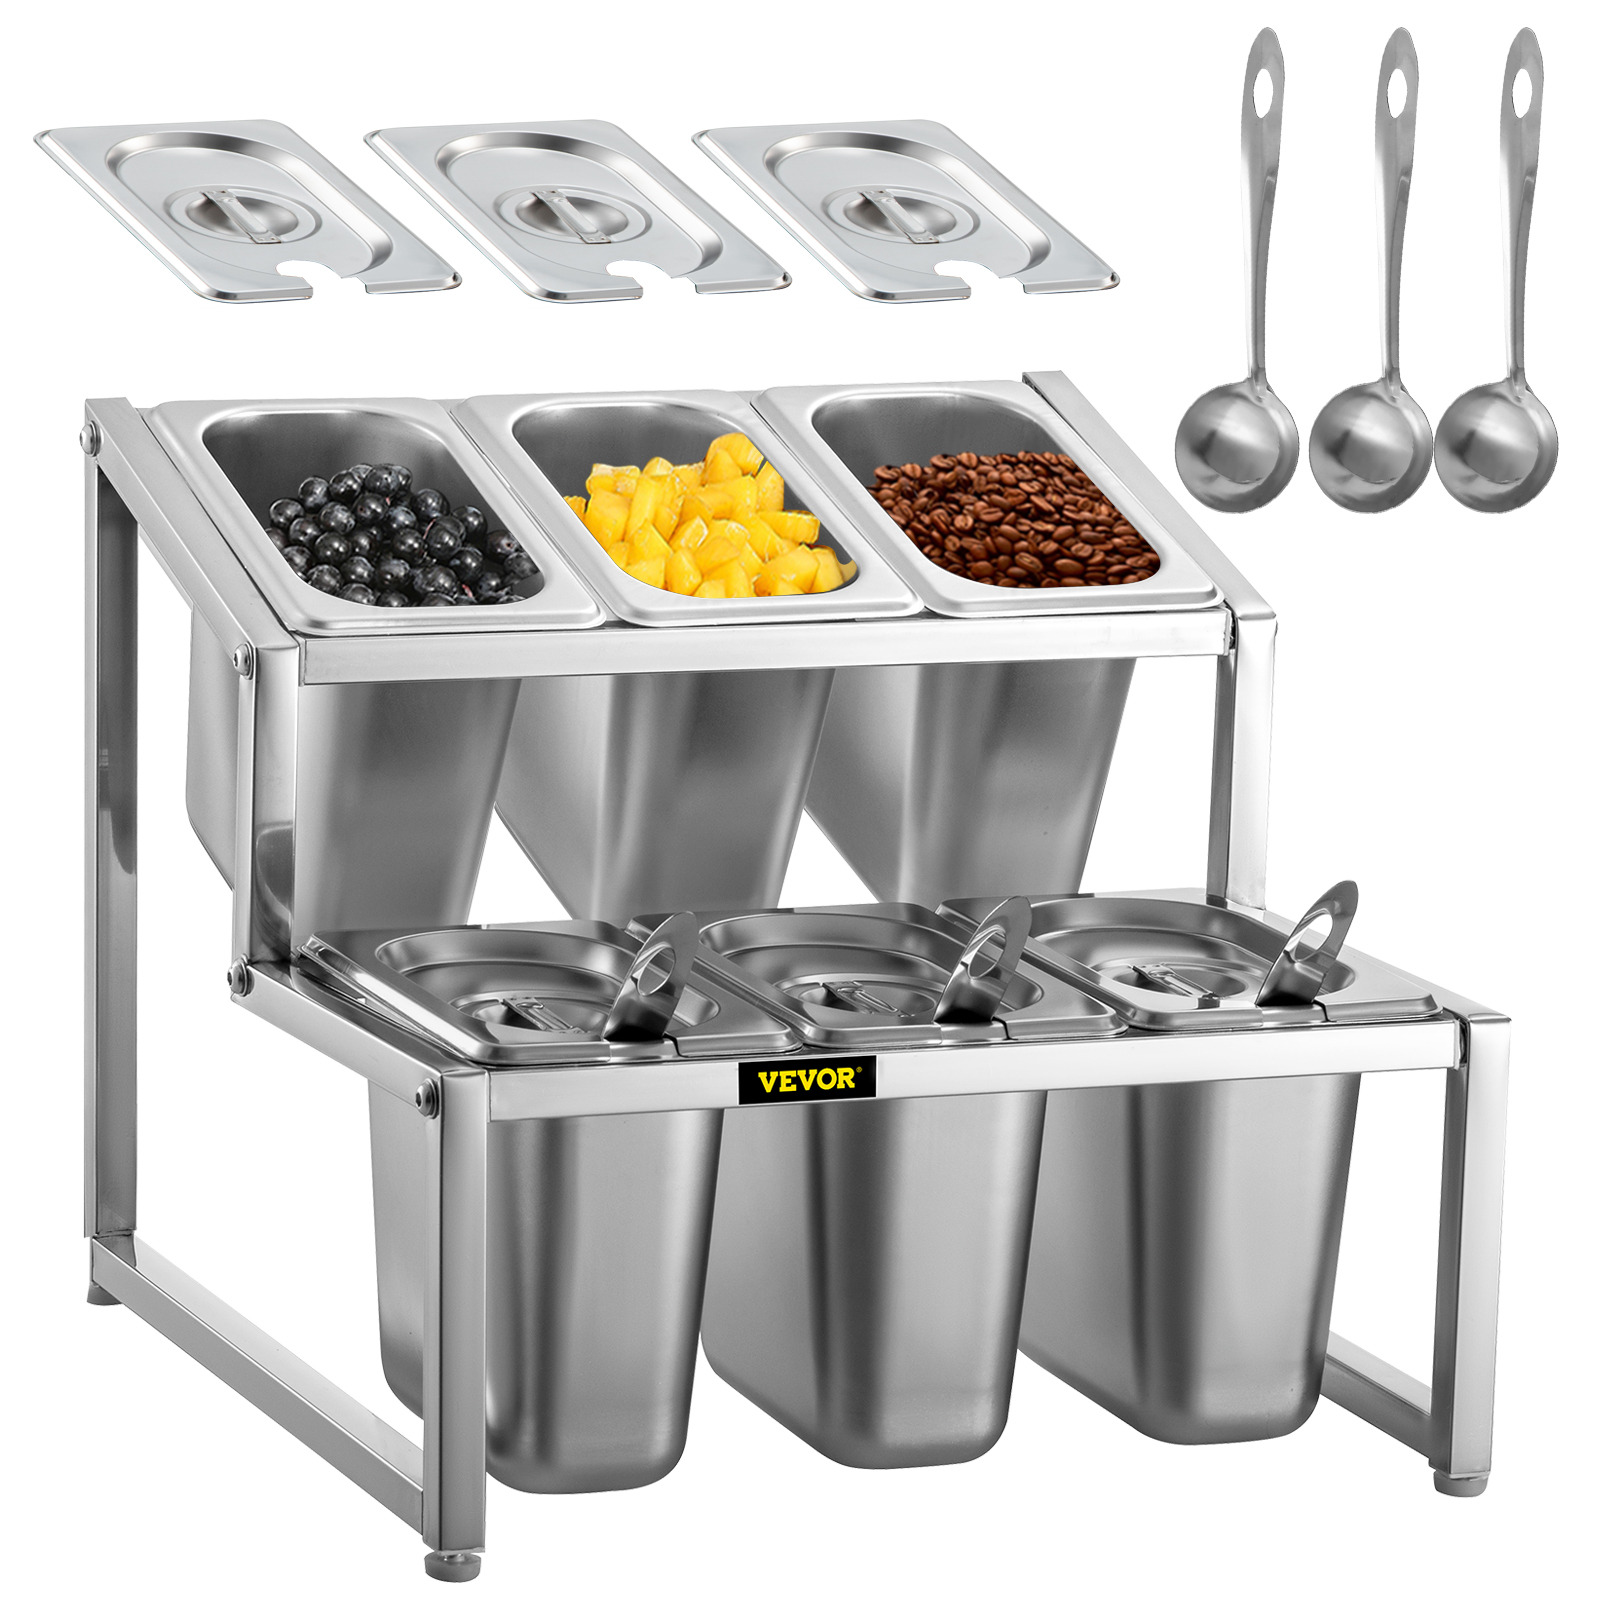 VEVOR Expandable Spice Rack Seasoning Organizer Holder 2 Tiers with 6 1/9 Pans от Vevor Many GEOs